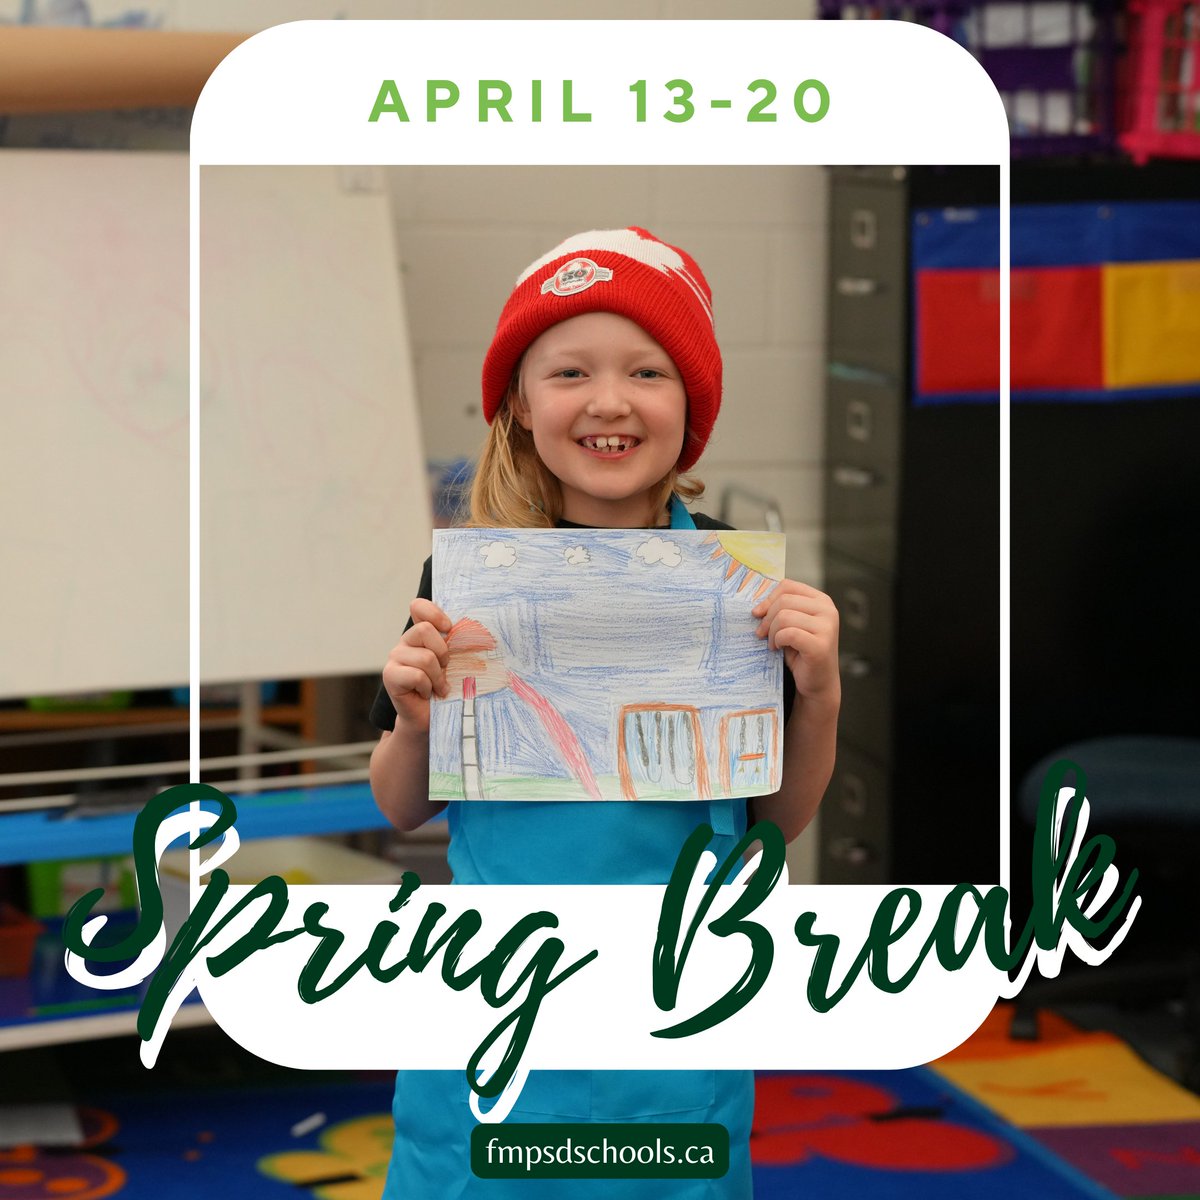 Spring Break Alert! To all our amazing students of #FMPSD, your well-deserved break starts today! Say goodbye to classrooms for a bit and hello to relaxation and adventure. Classes resume on April 22. Enjoy every minute of your break! @annaleeskinner #FMPSD #YMM #RMWB